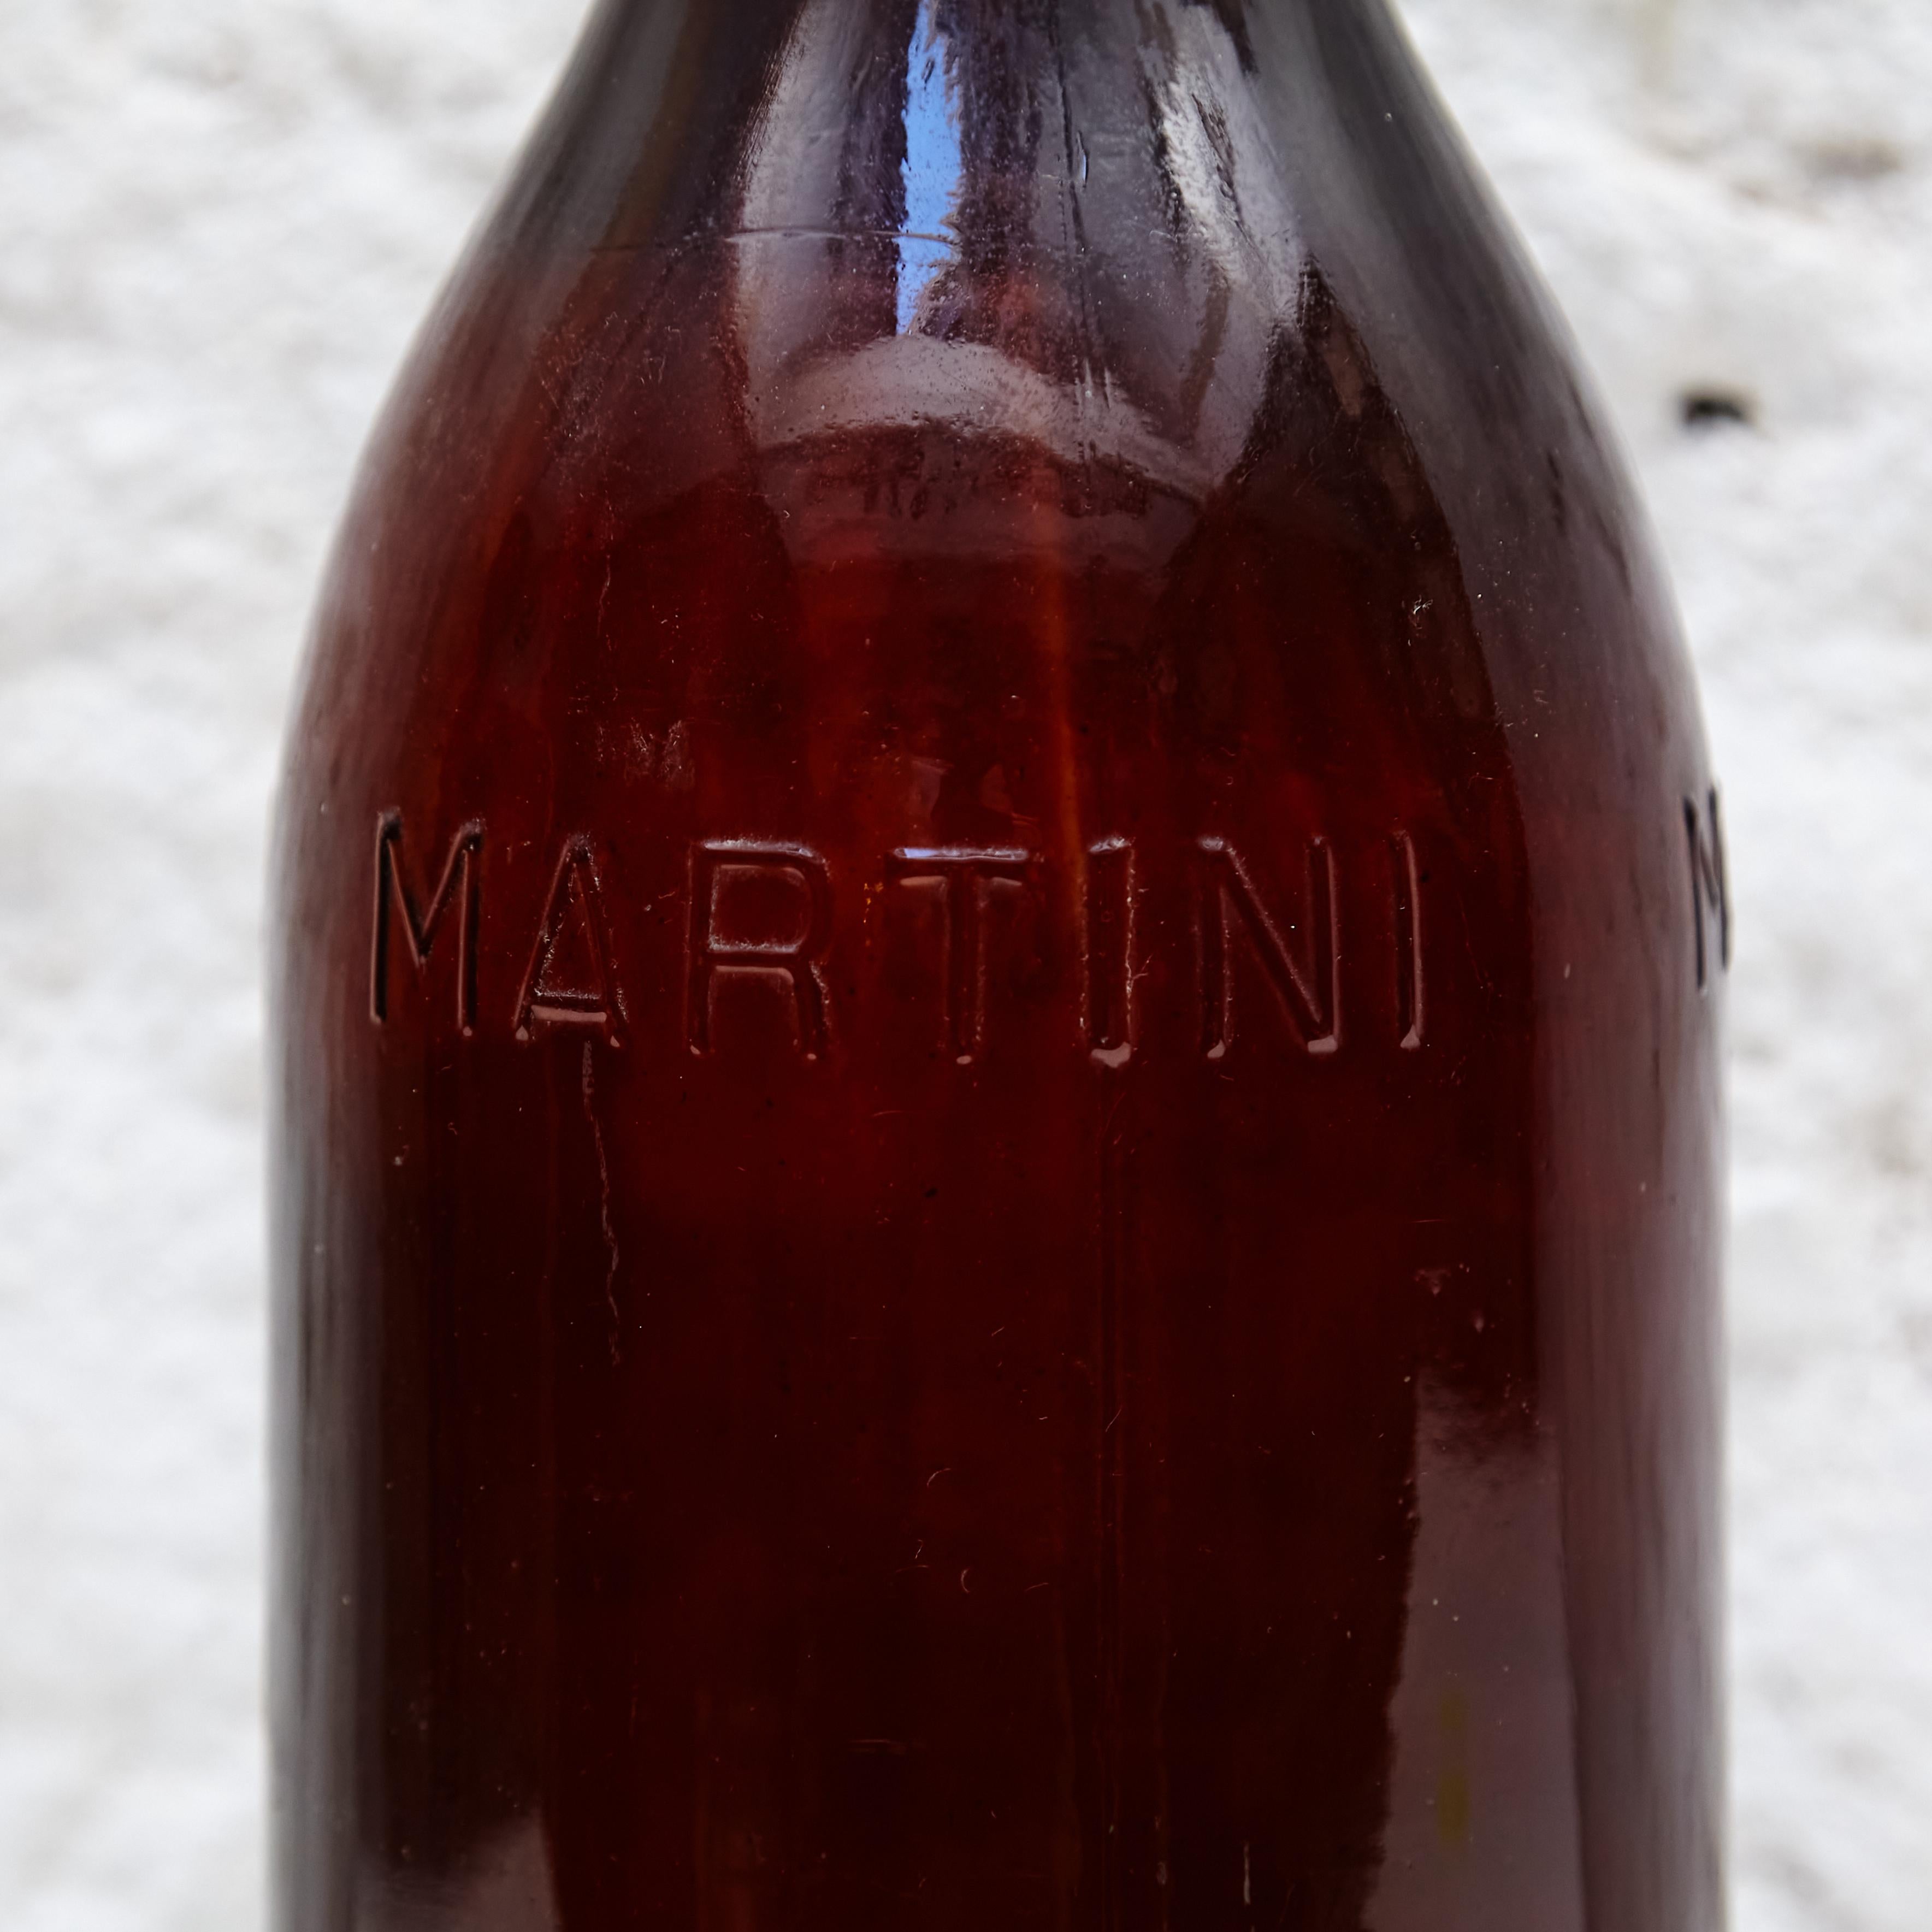 Big Martini glass bottle for French advertising.

Manufactured in France, circa 1940.

In good original condition, with consistent with age and use, preserving a beautiful patina with some scratches.

Dimensions: 
Diameter 15 cm x Height 54